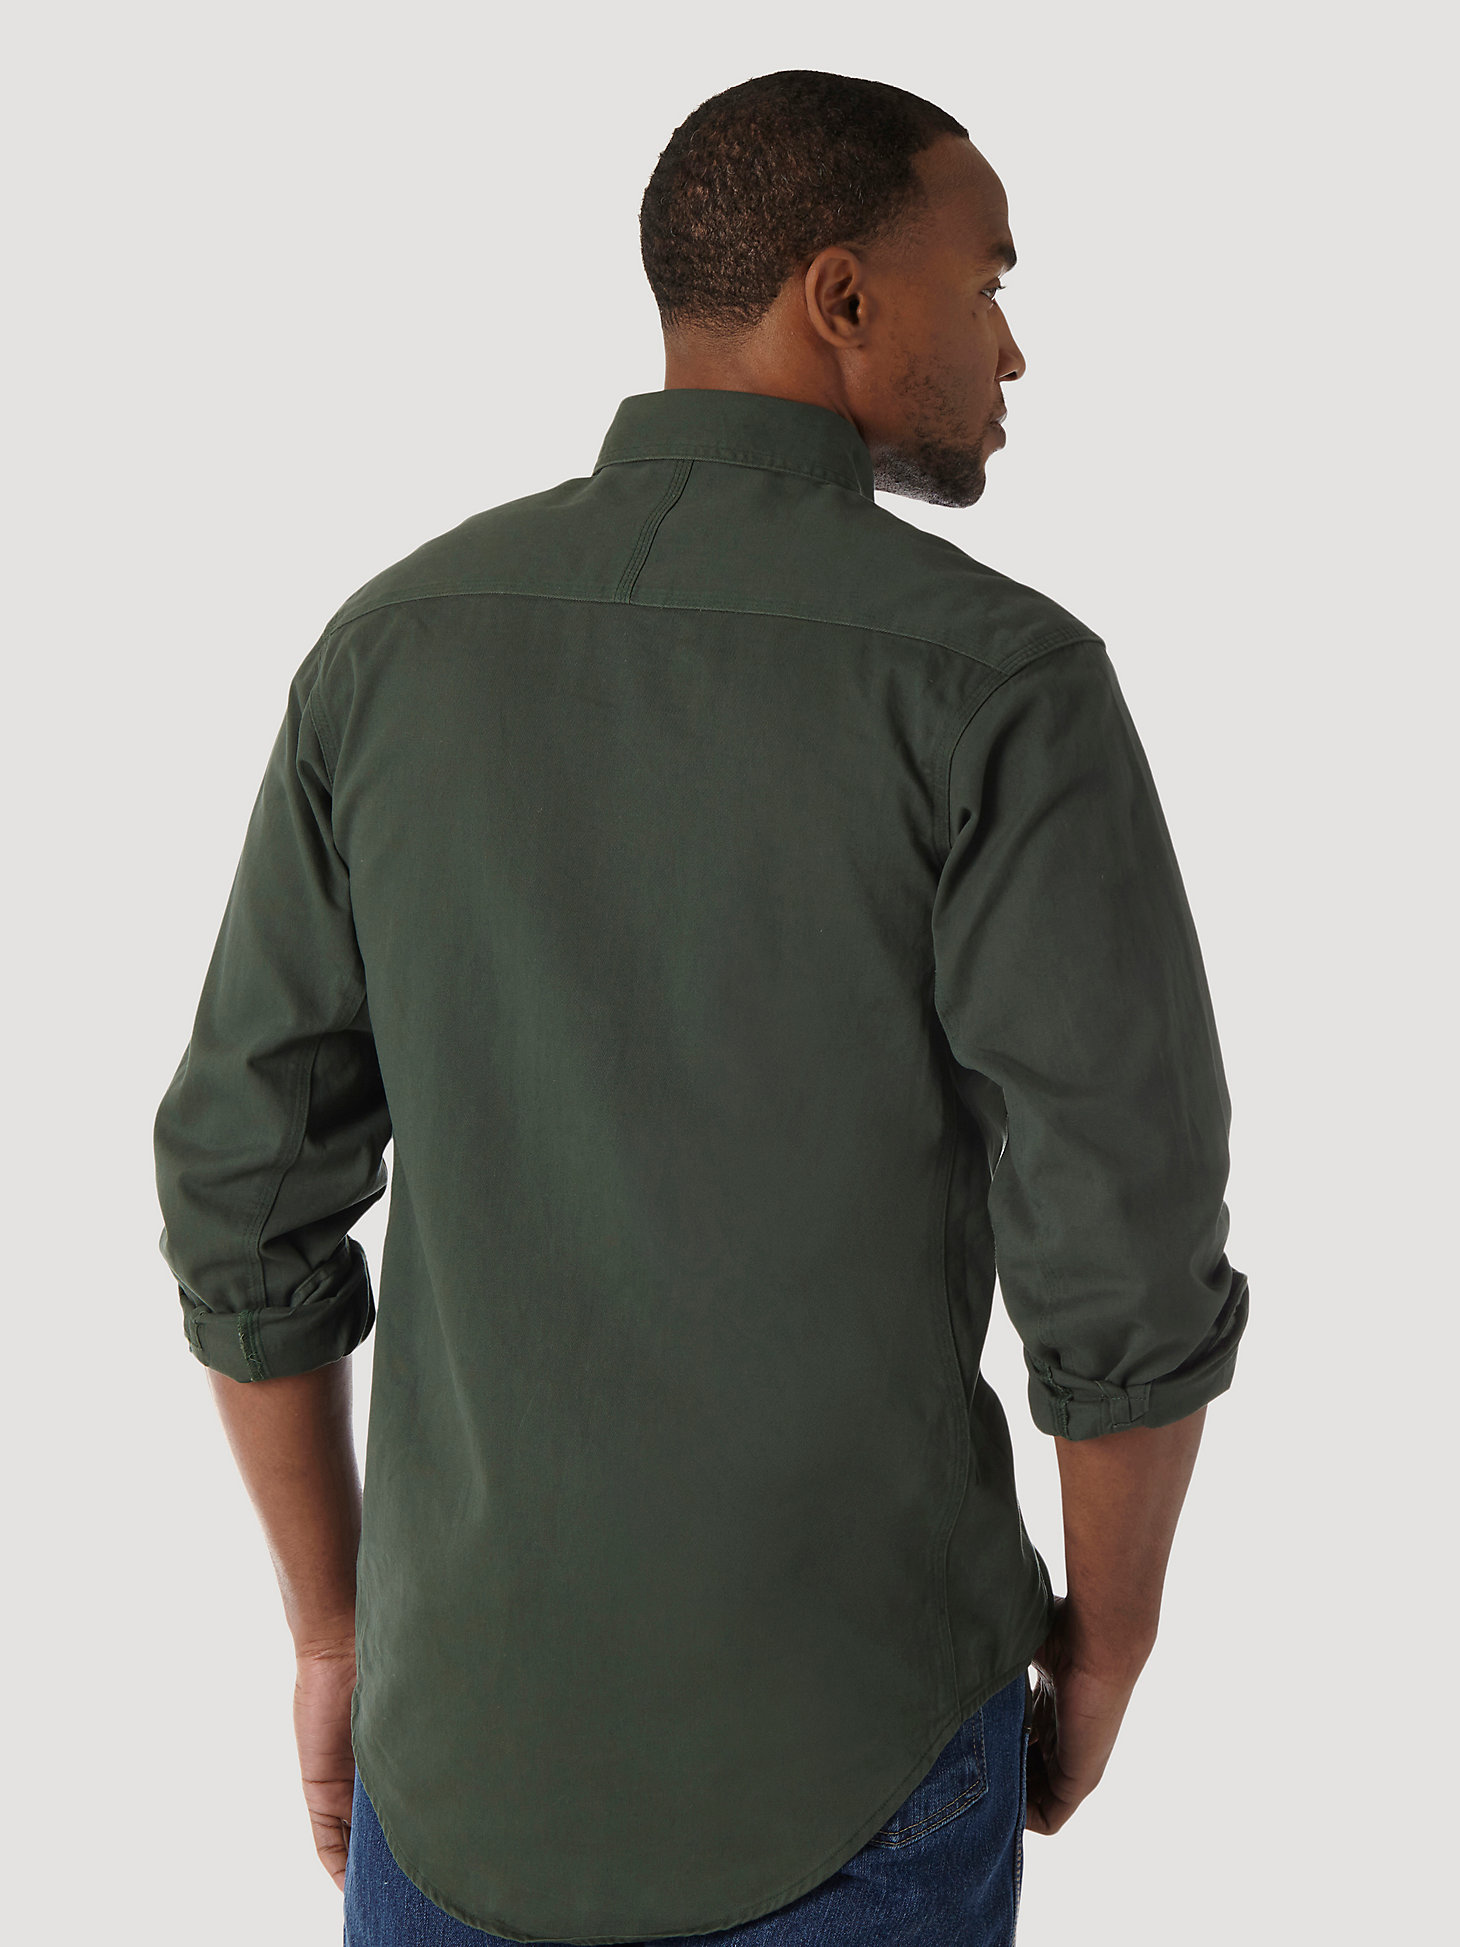 Wrangler® RIGGS Workwear® Long Sleeve Button Down Solid Twill Work Shirt in Forest Green alternative view 4